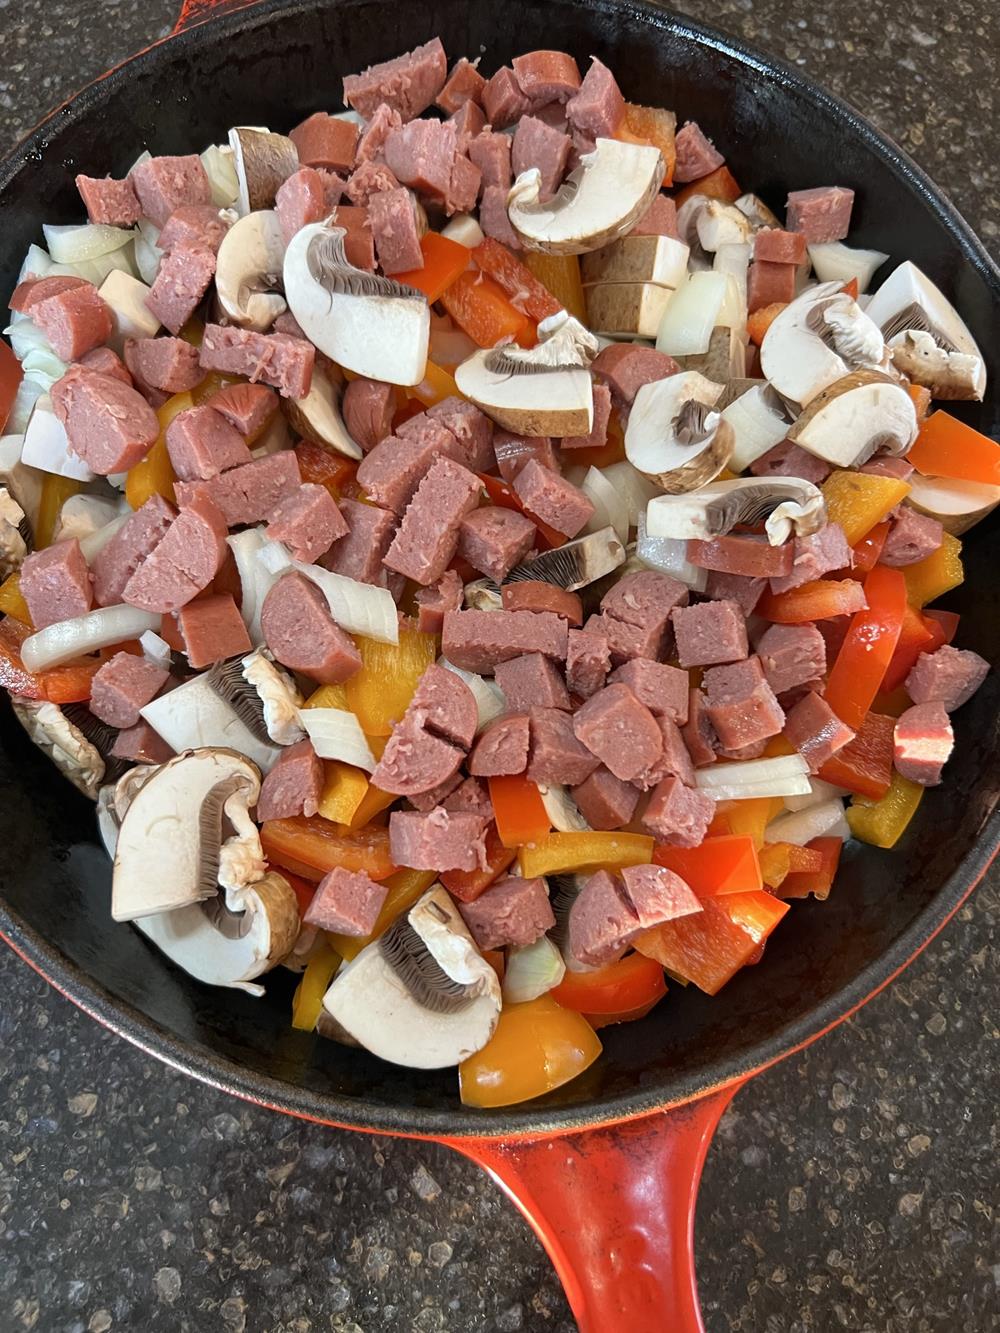 uncooked vegetables and meat in cast iron pan